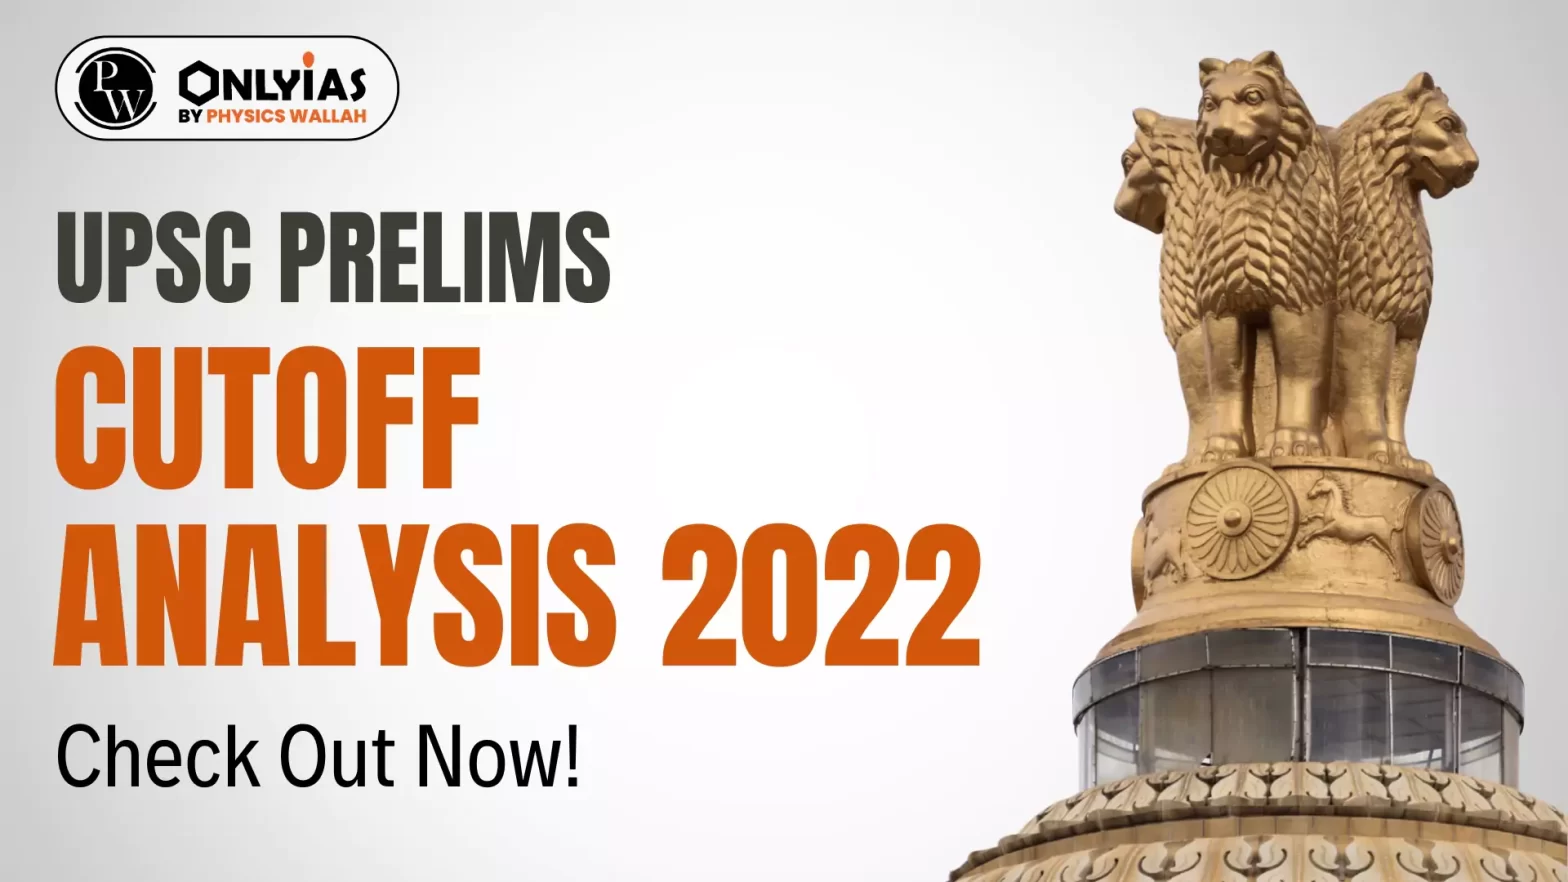 UPSC Prelims Cutoff Analysis 2022, Check Out Now!